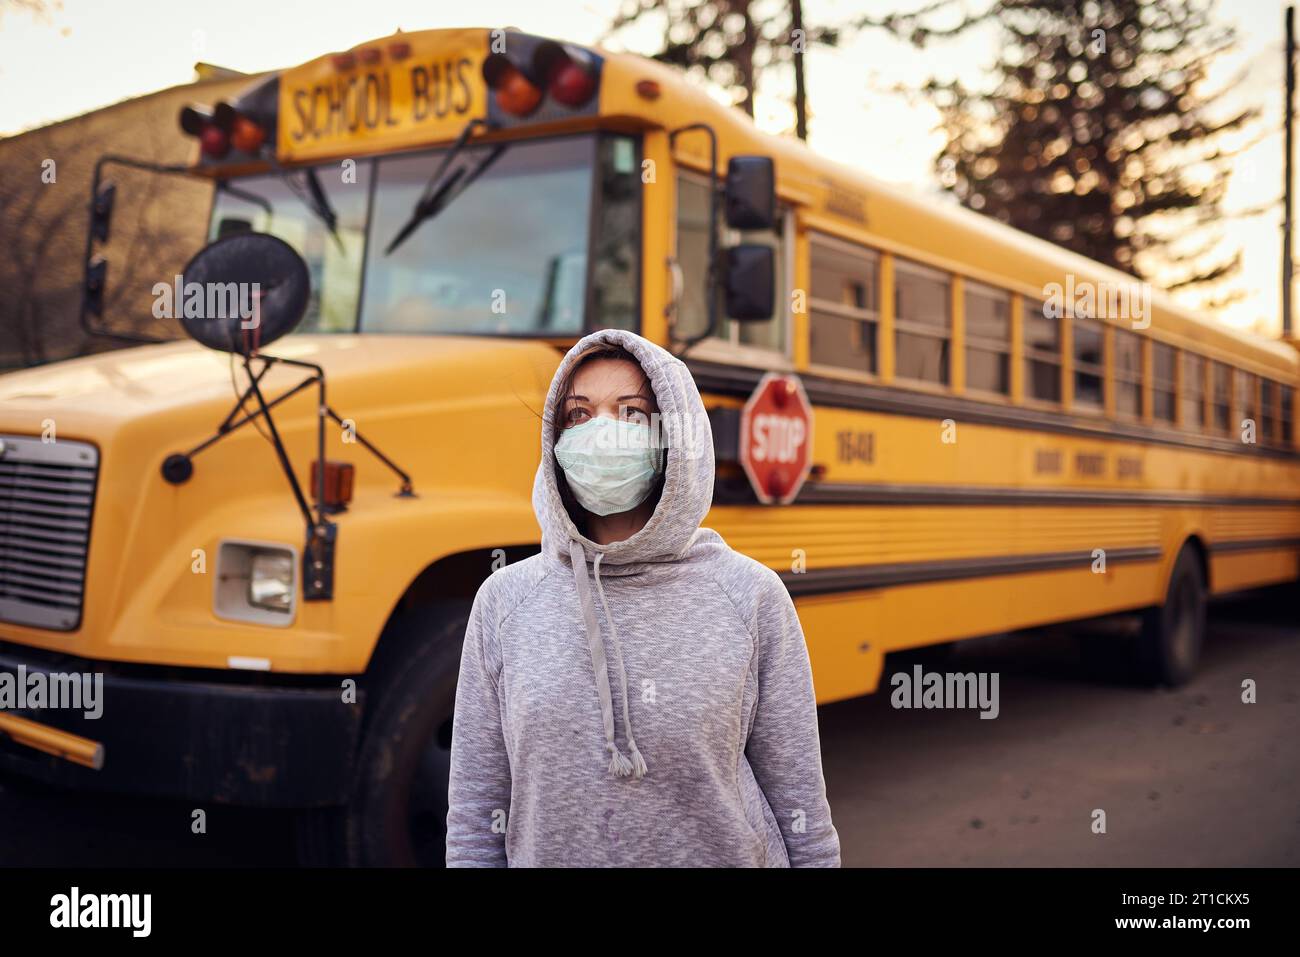 A woman in a protective mask stands on the background of a school bus. A large stop sign is visible on the background. Stock Photo